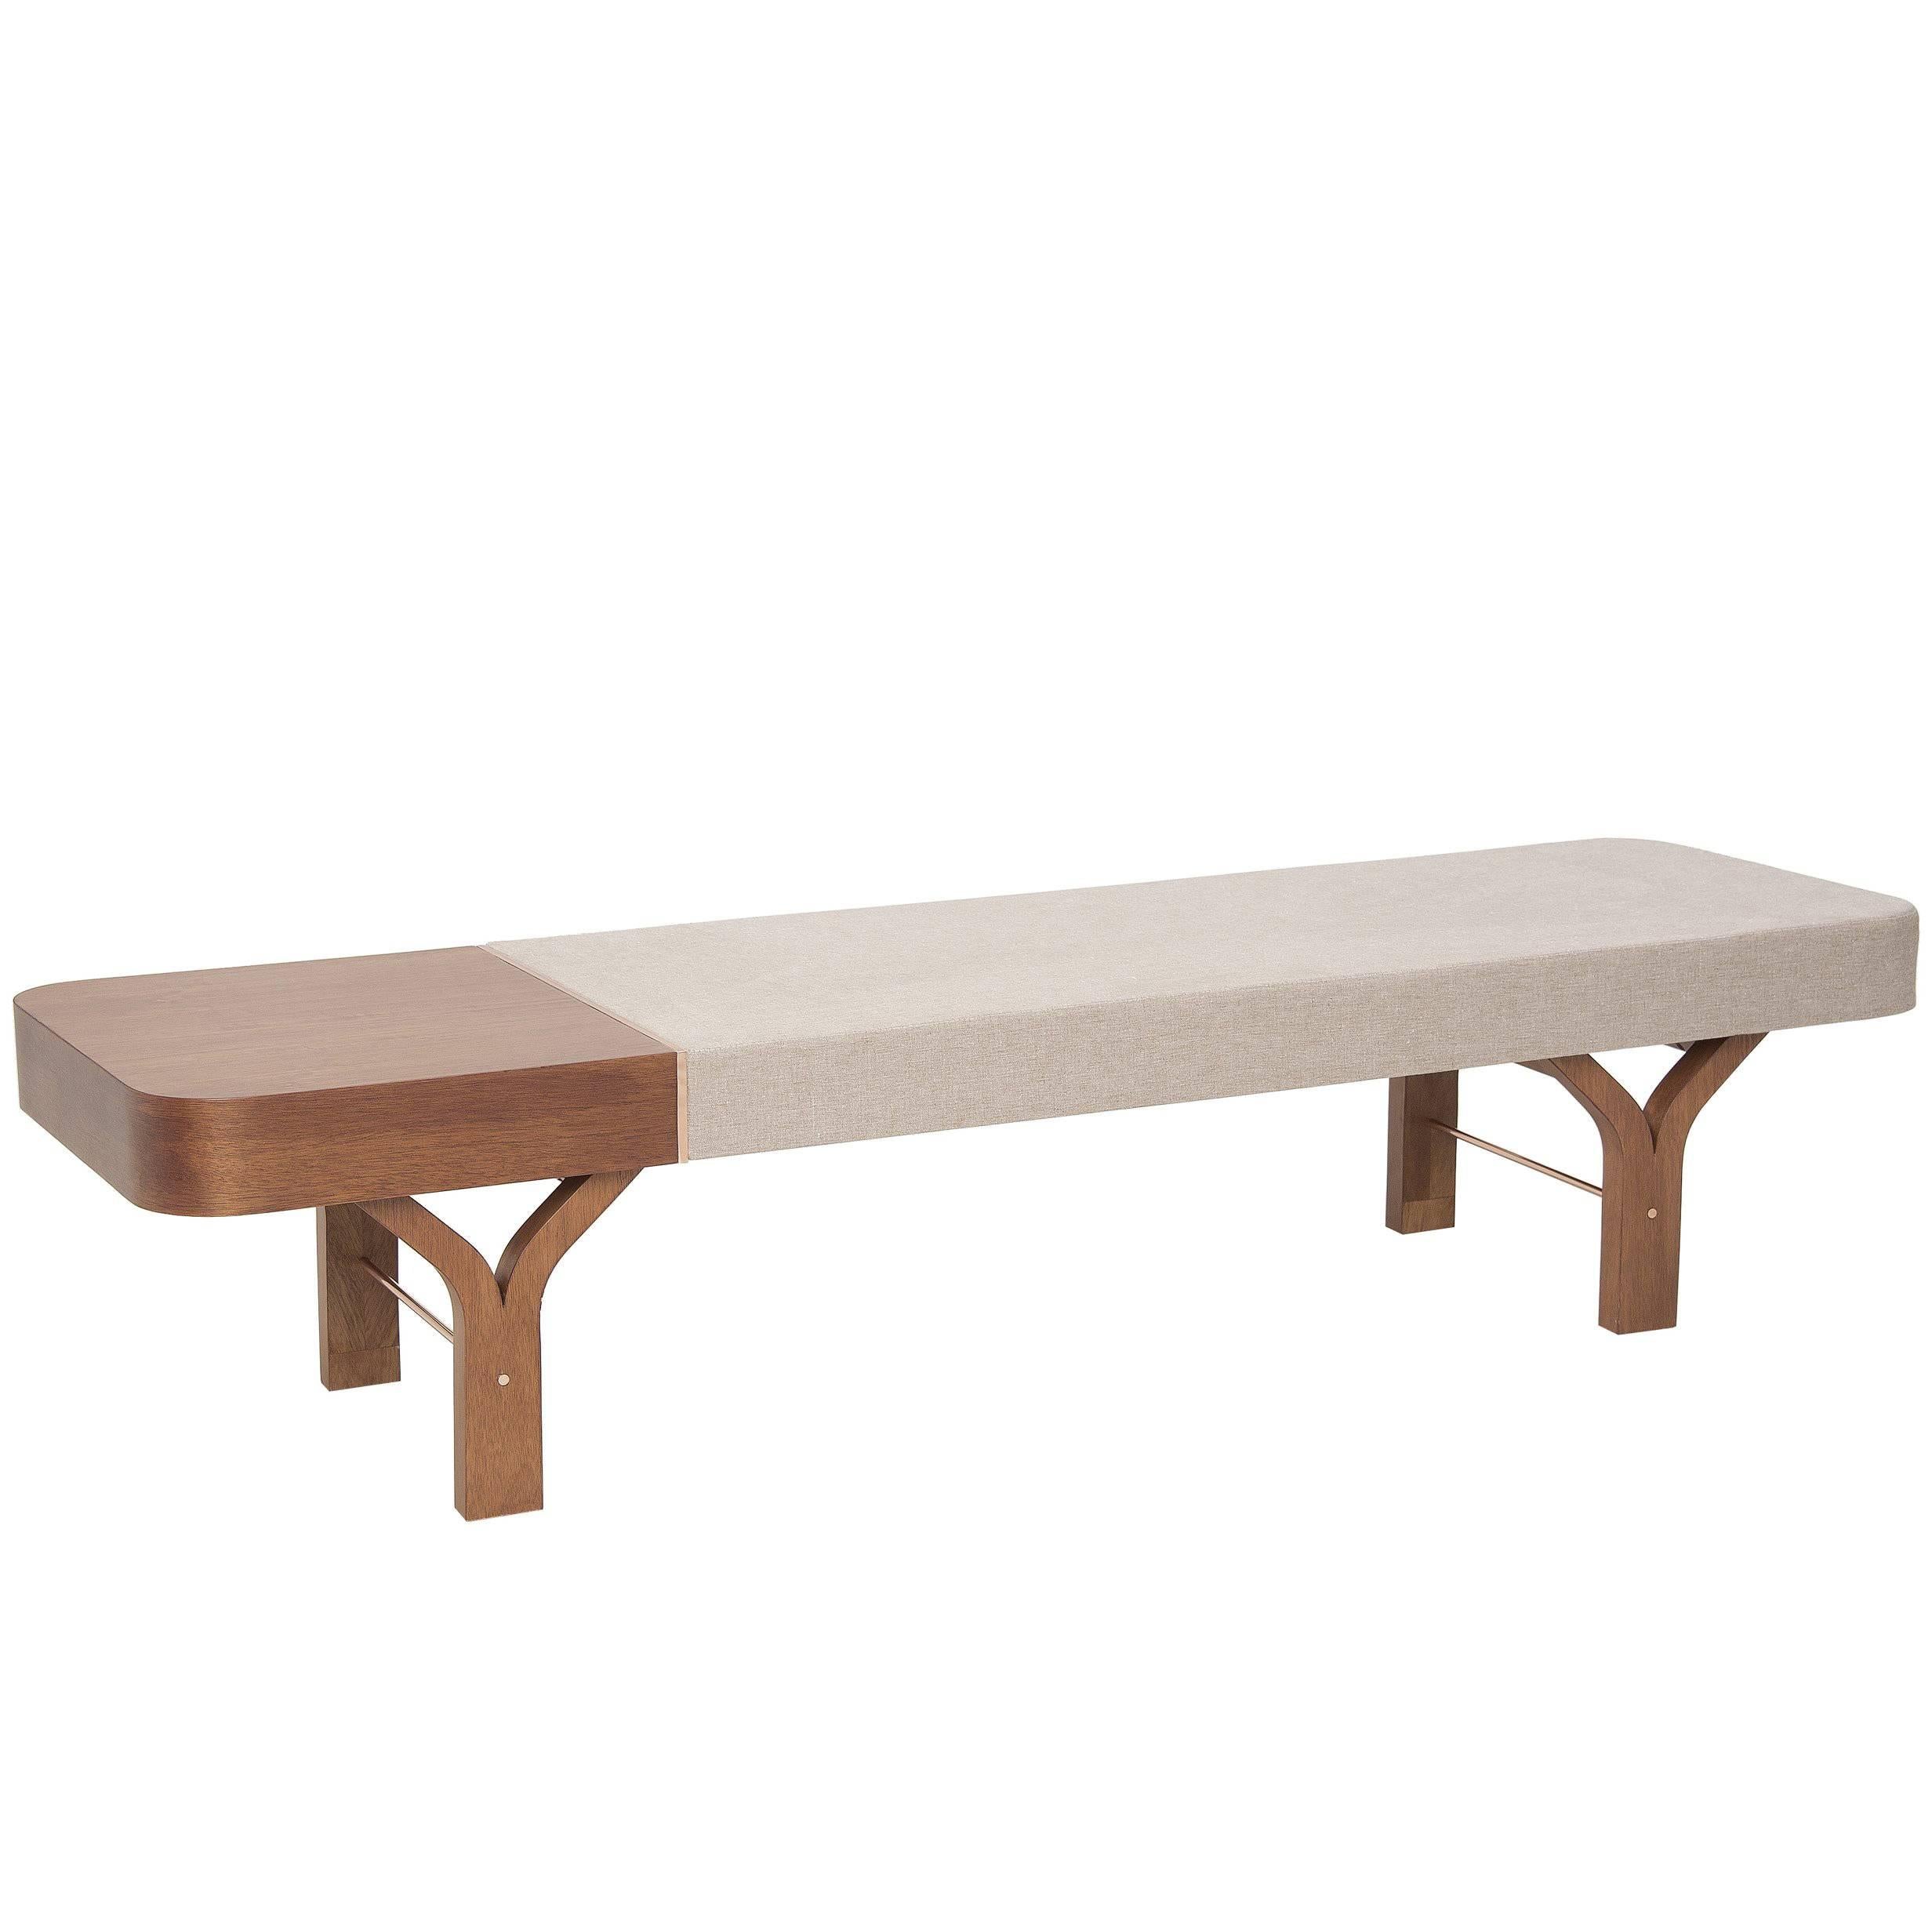 Due Brazilian Contemporary Wood Bench and Table by Lattoog